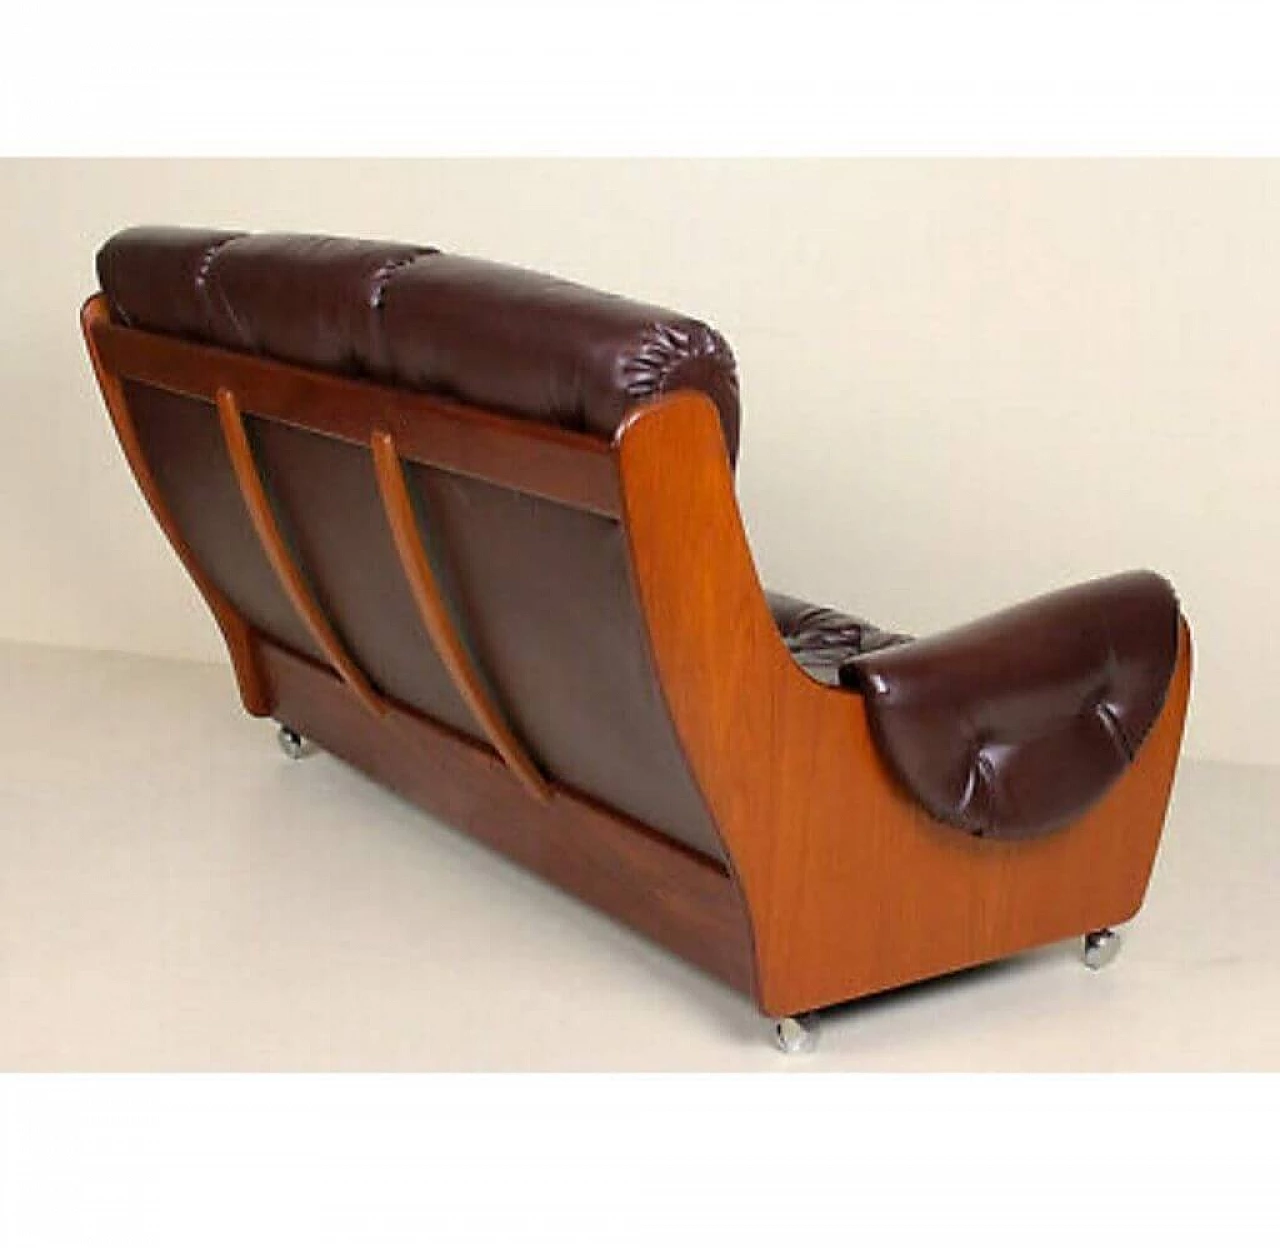 English leather and teak sofa by G. Plan, '70s 1191904